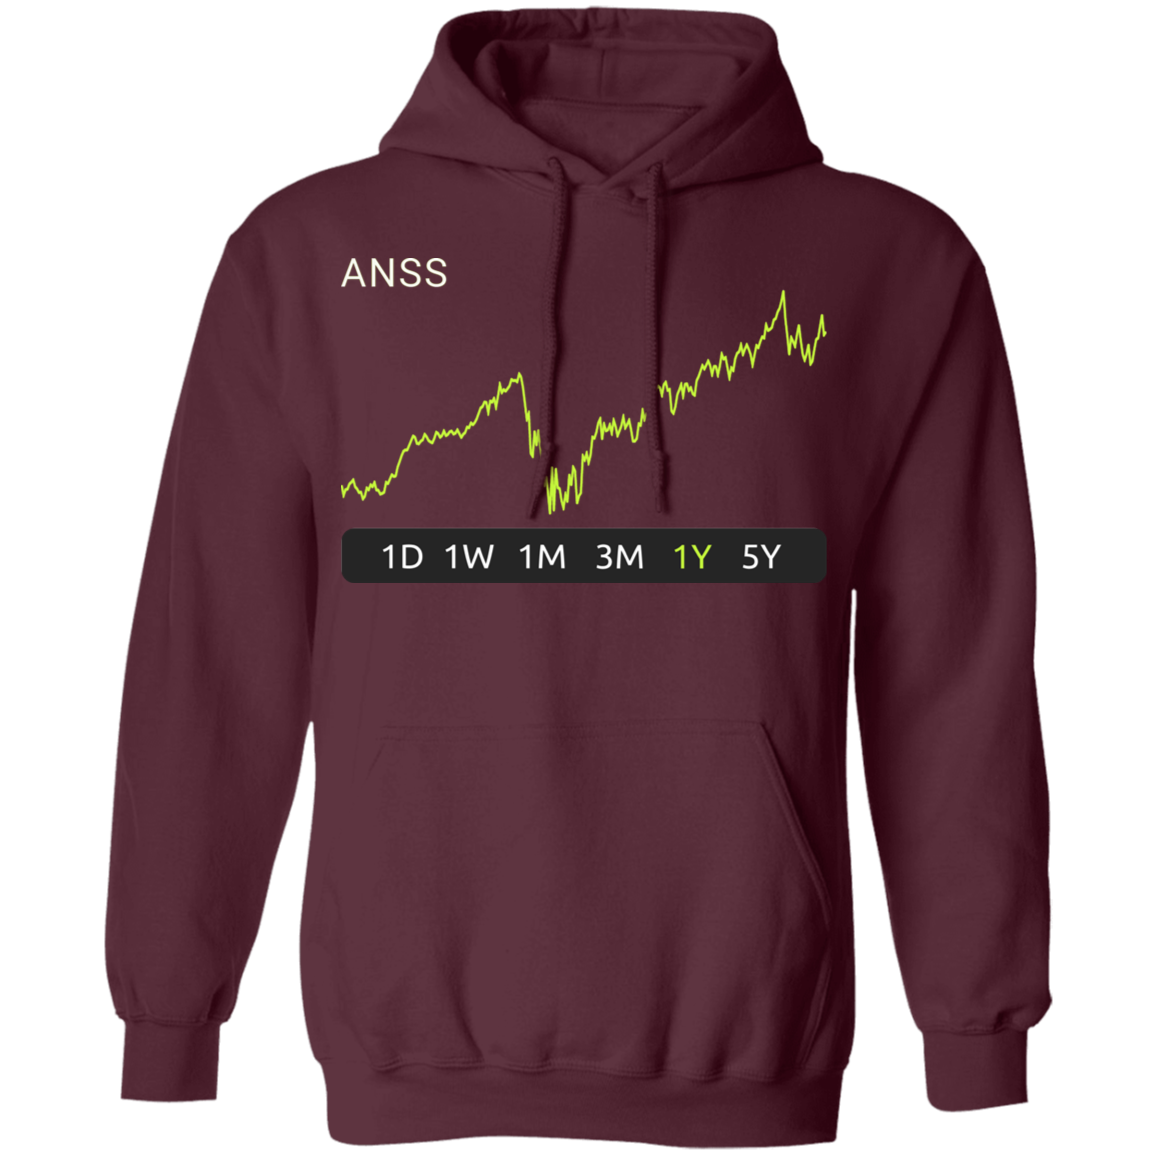 ANSS Stock 1y Pullover Hoodie